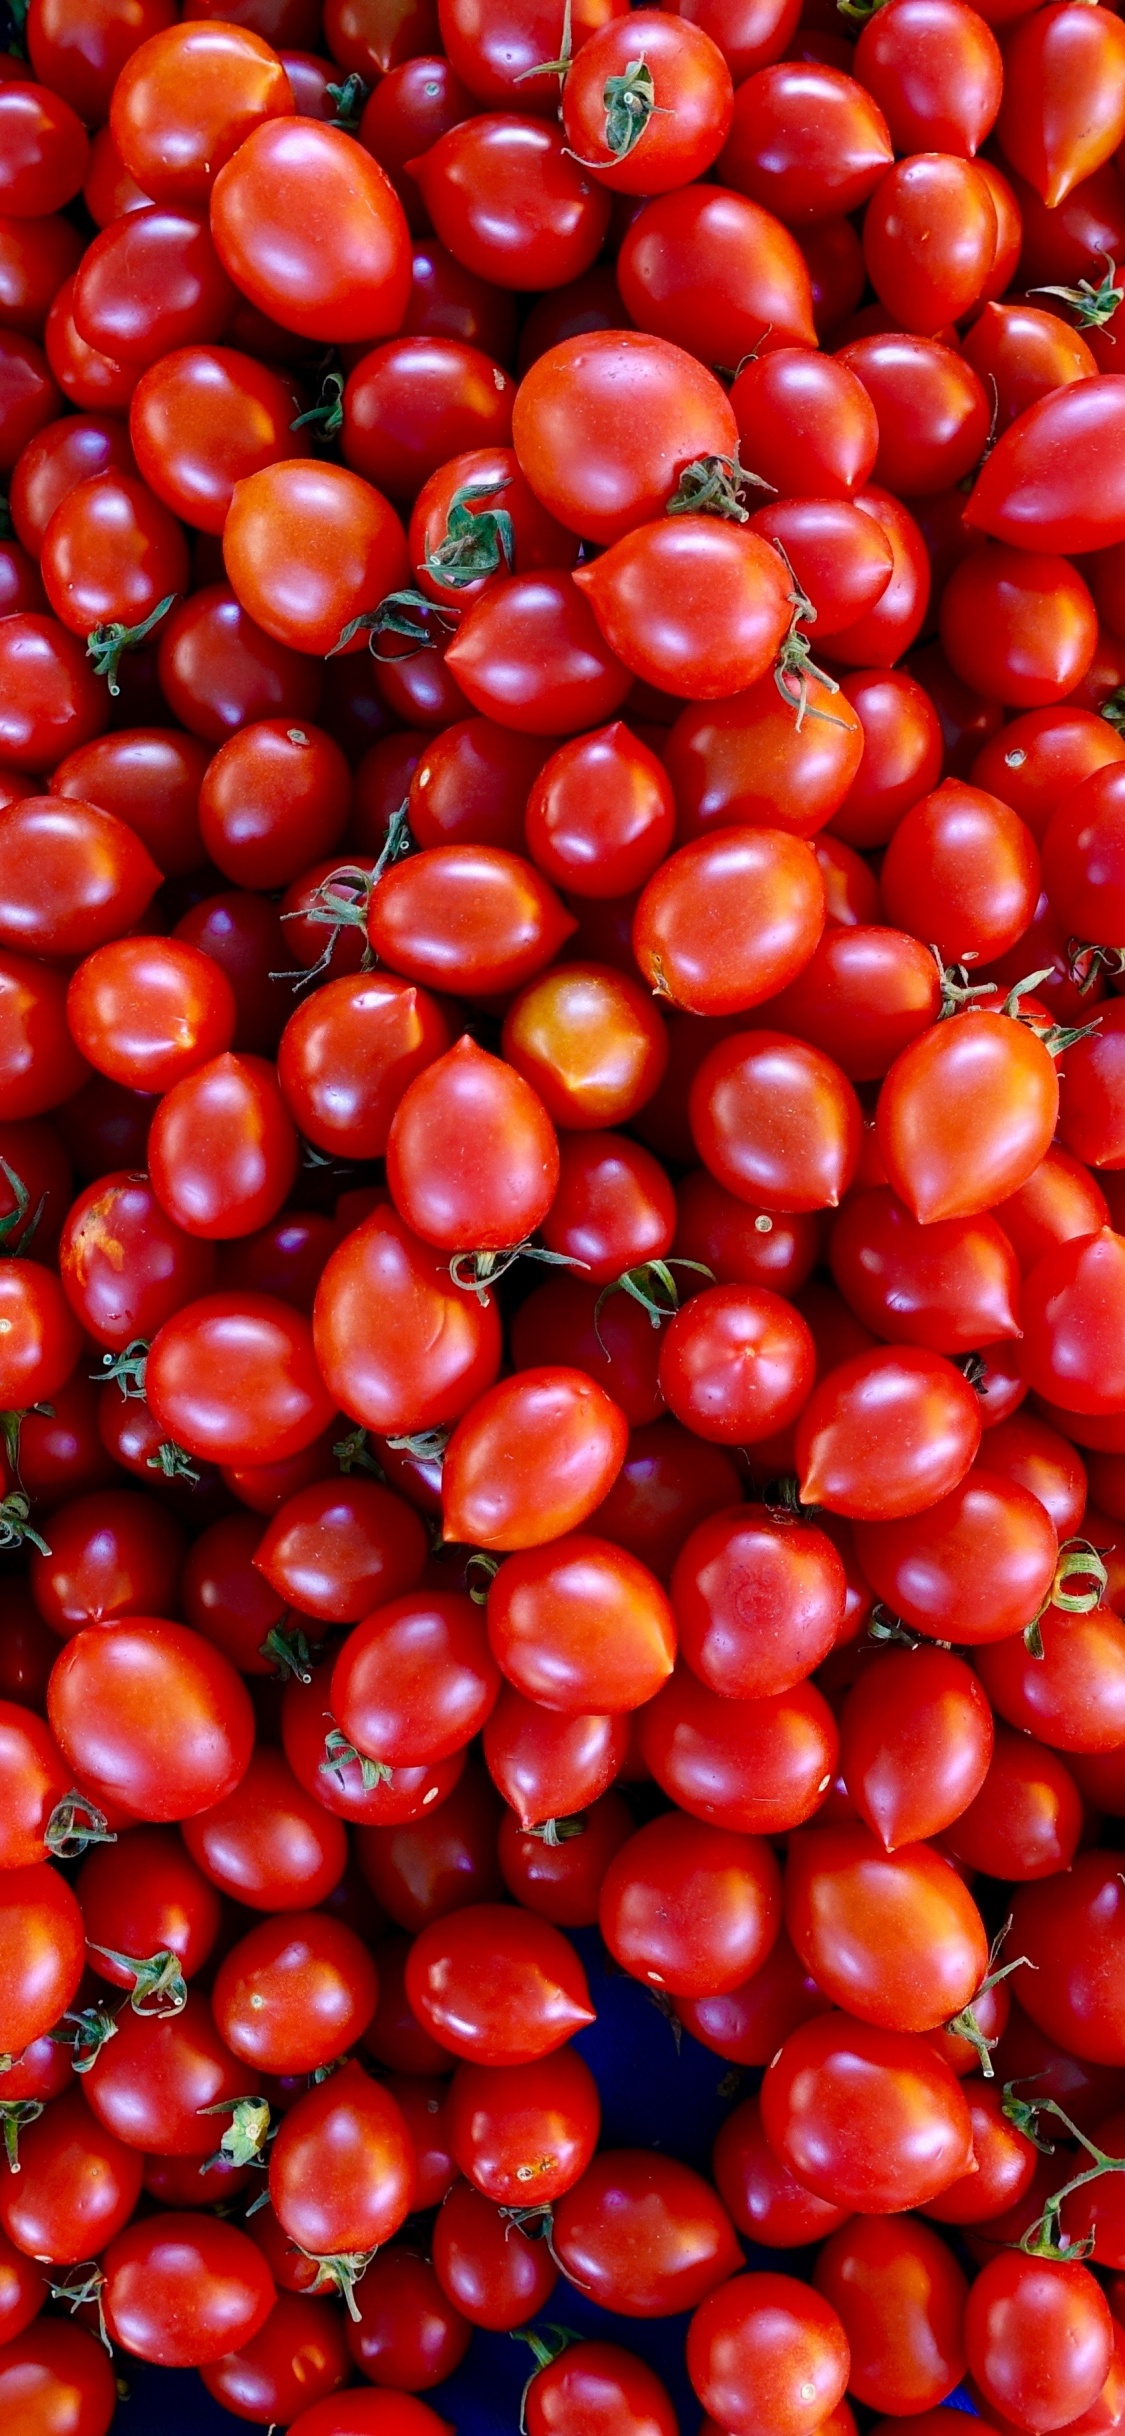 Red Round Fruits on Blue Plastic Container. Wallpaper in 1125x2436 Resolution